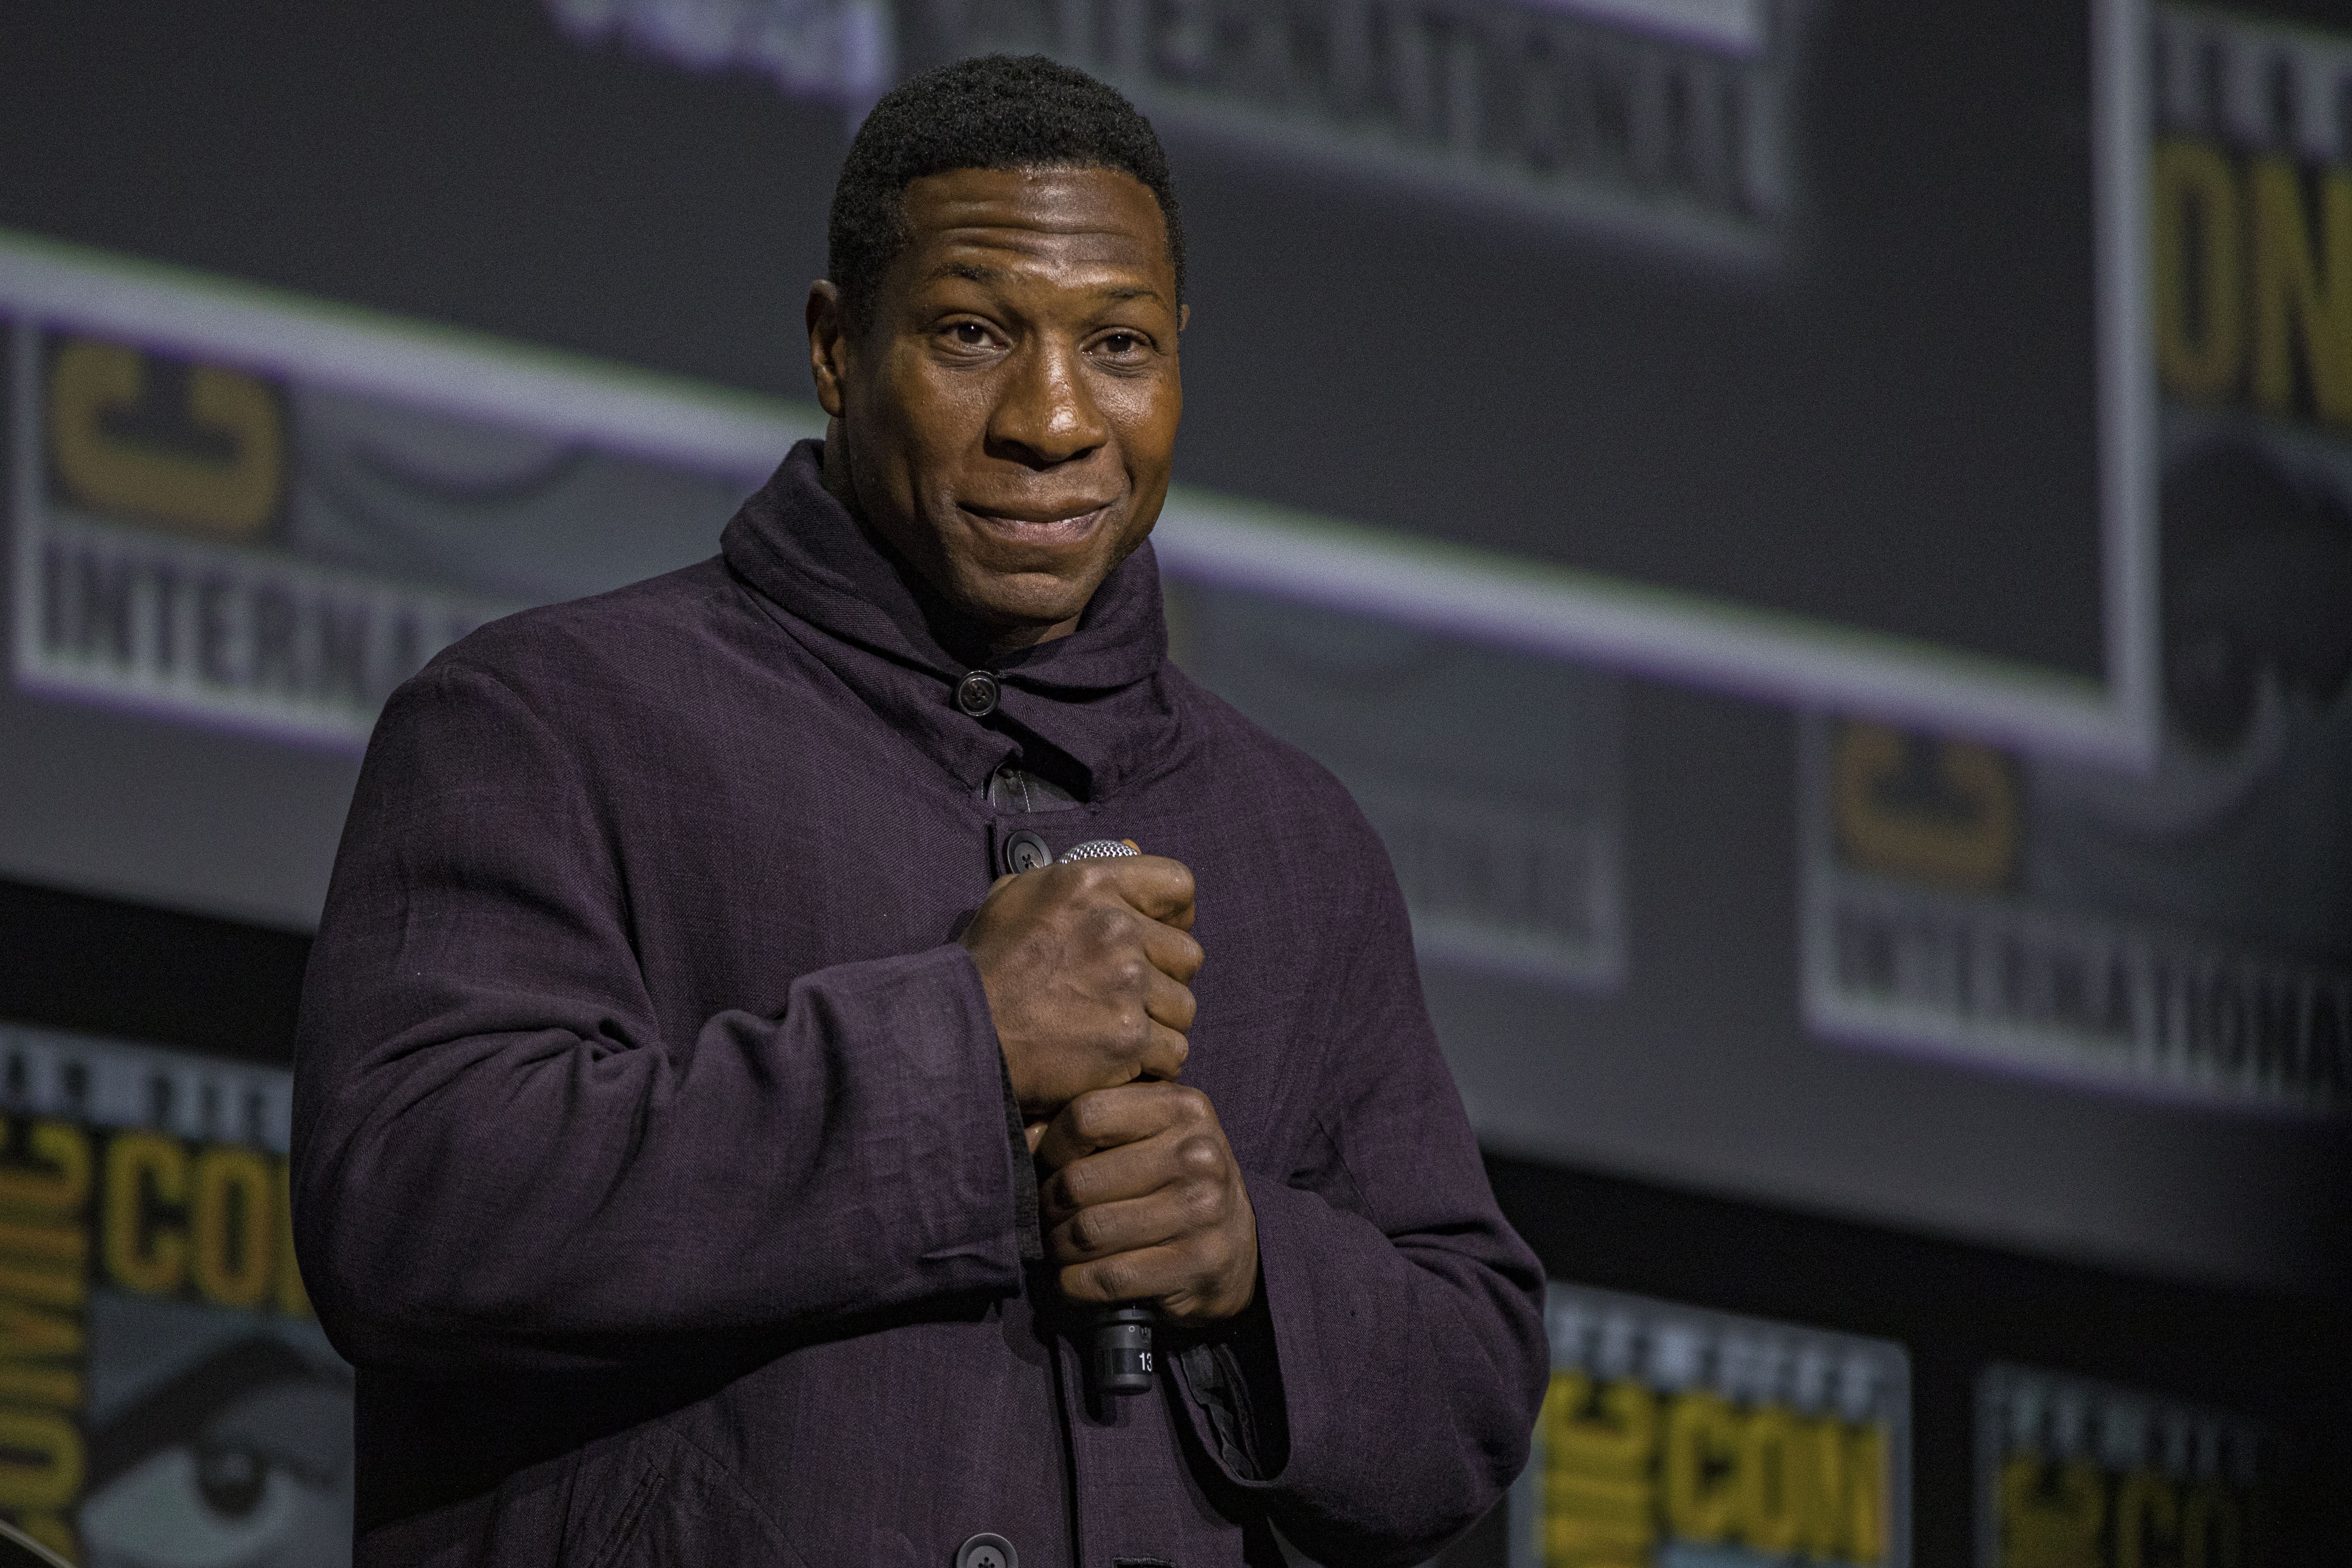 Jonathan Majors, who plays Kang the Conqueror in the MCU, wears a dark purple jacket while speaking onstage at San Diego Comic-Con 2022.